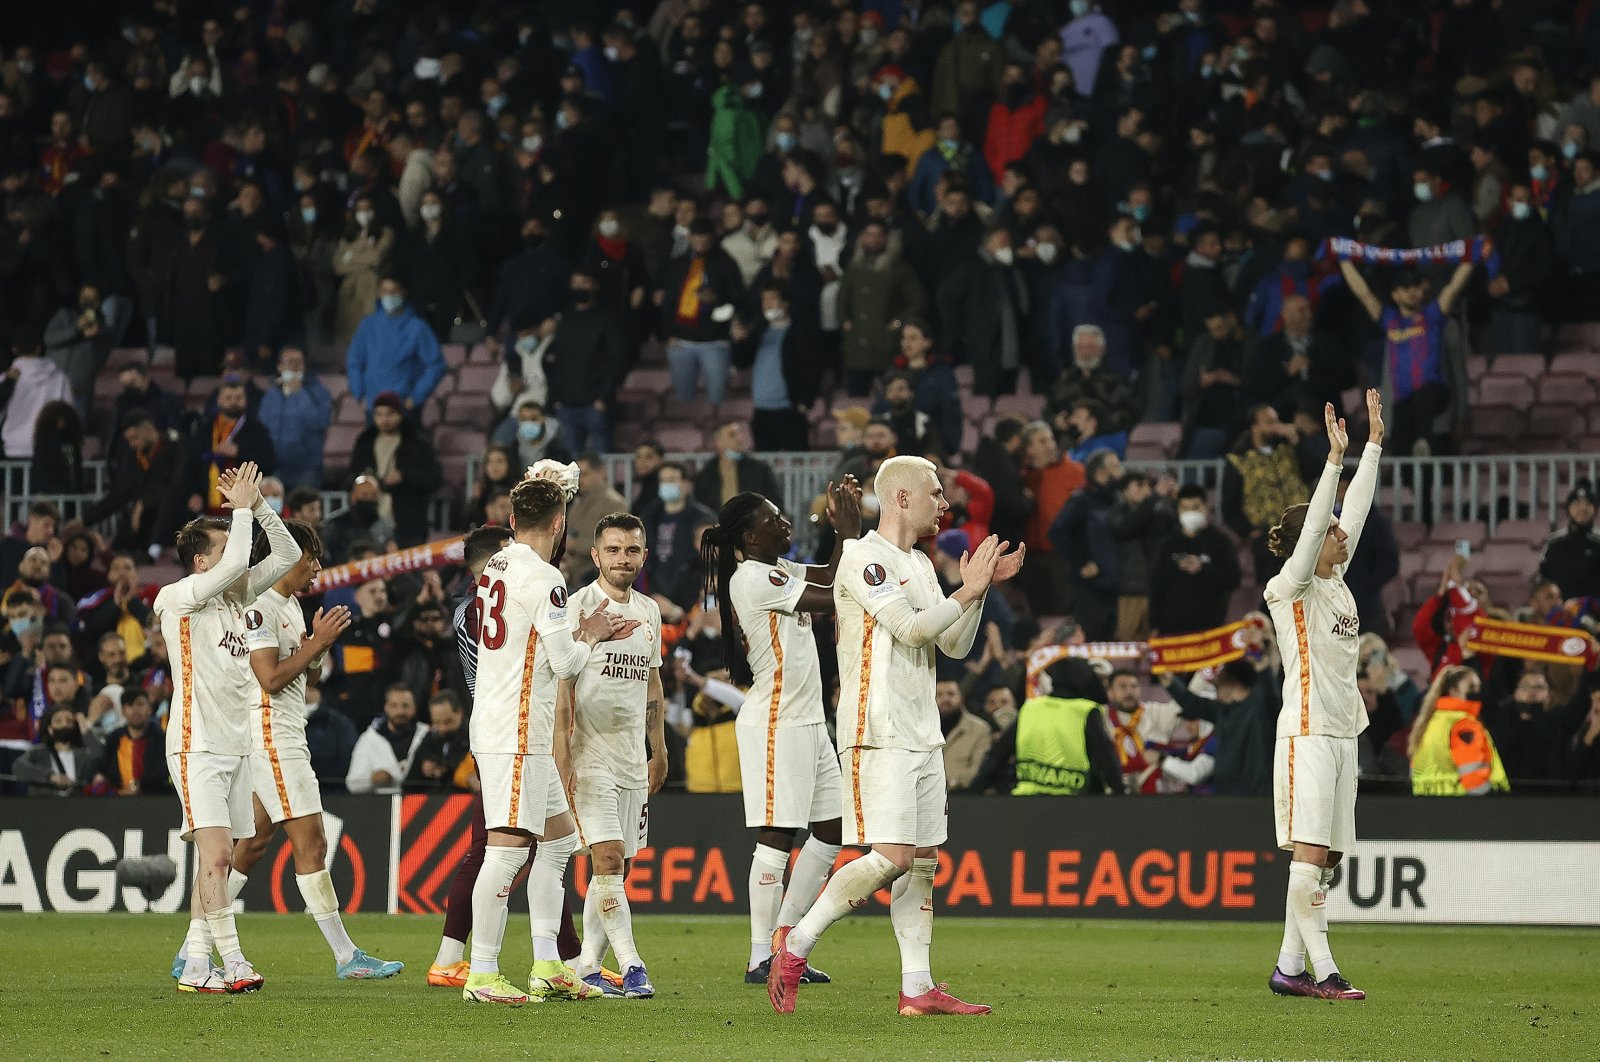 Galatasaray players are seen after the Europa League match against Barcelona at the Nou Camp on Mar. 10, 2022 (AA Photo)